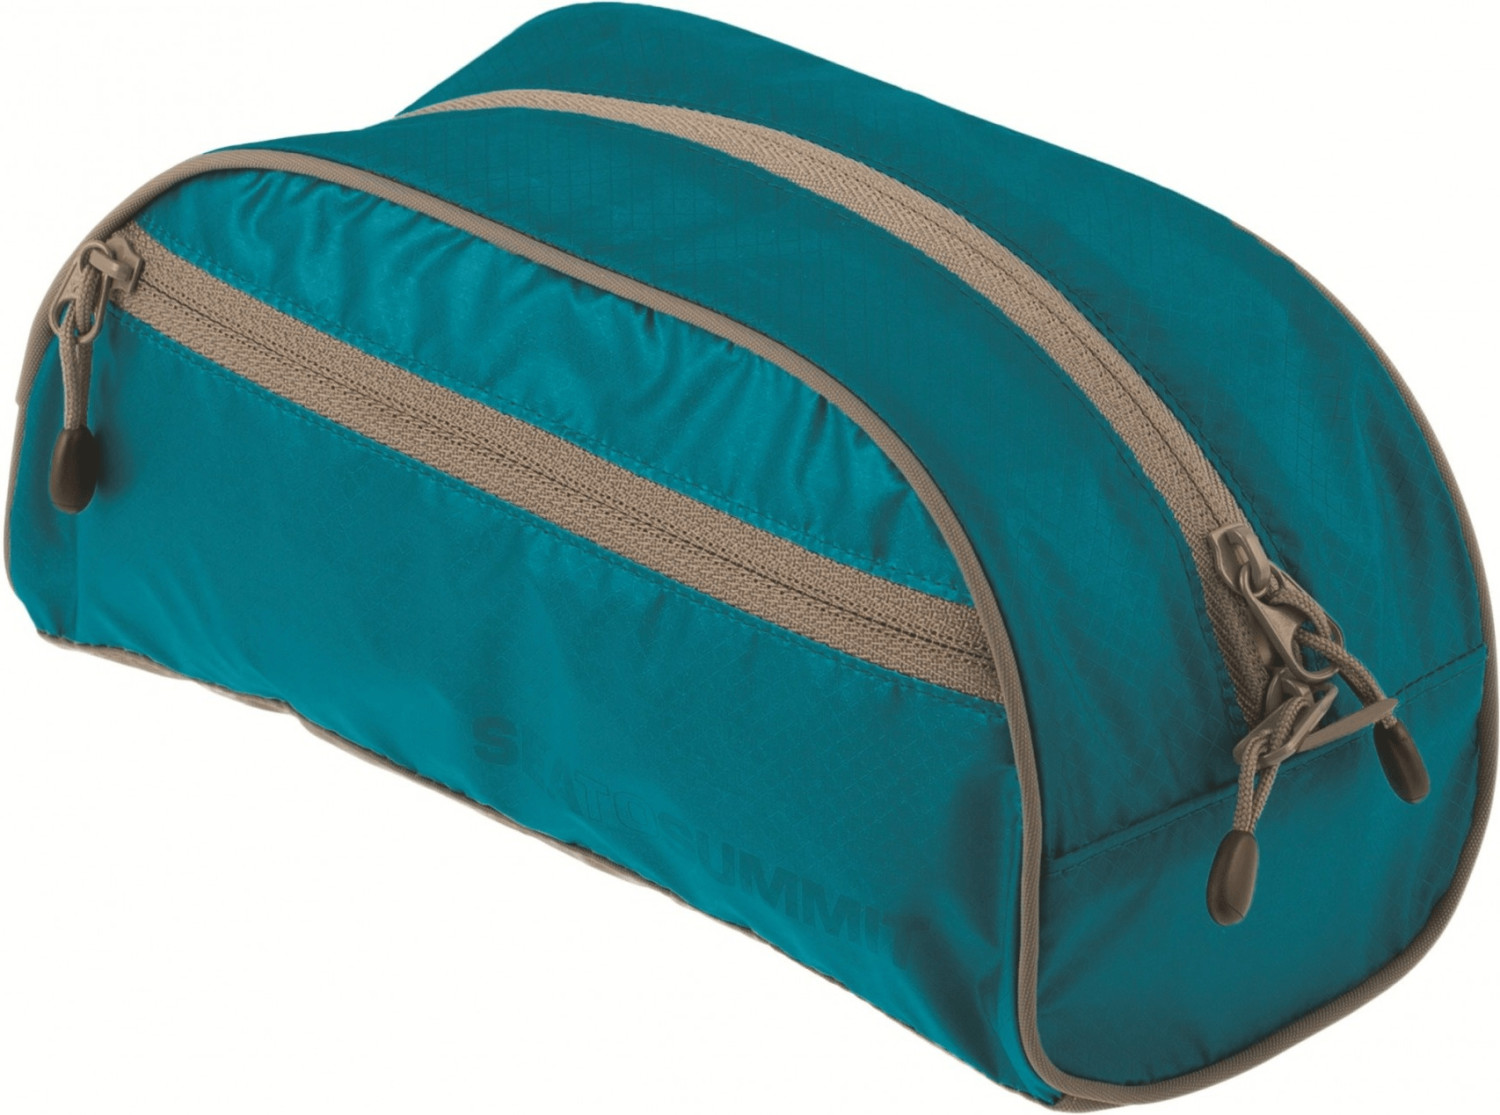 Sea to Summit Toiletry Bag Small blue/grey (ATLTBS)